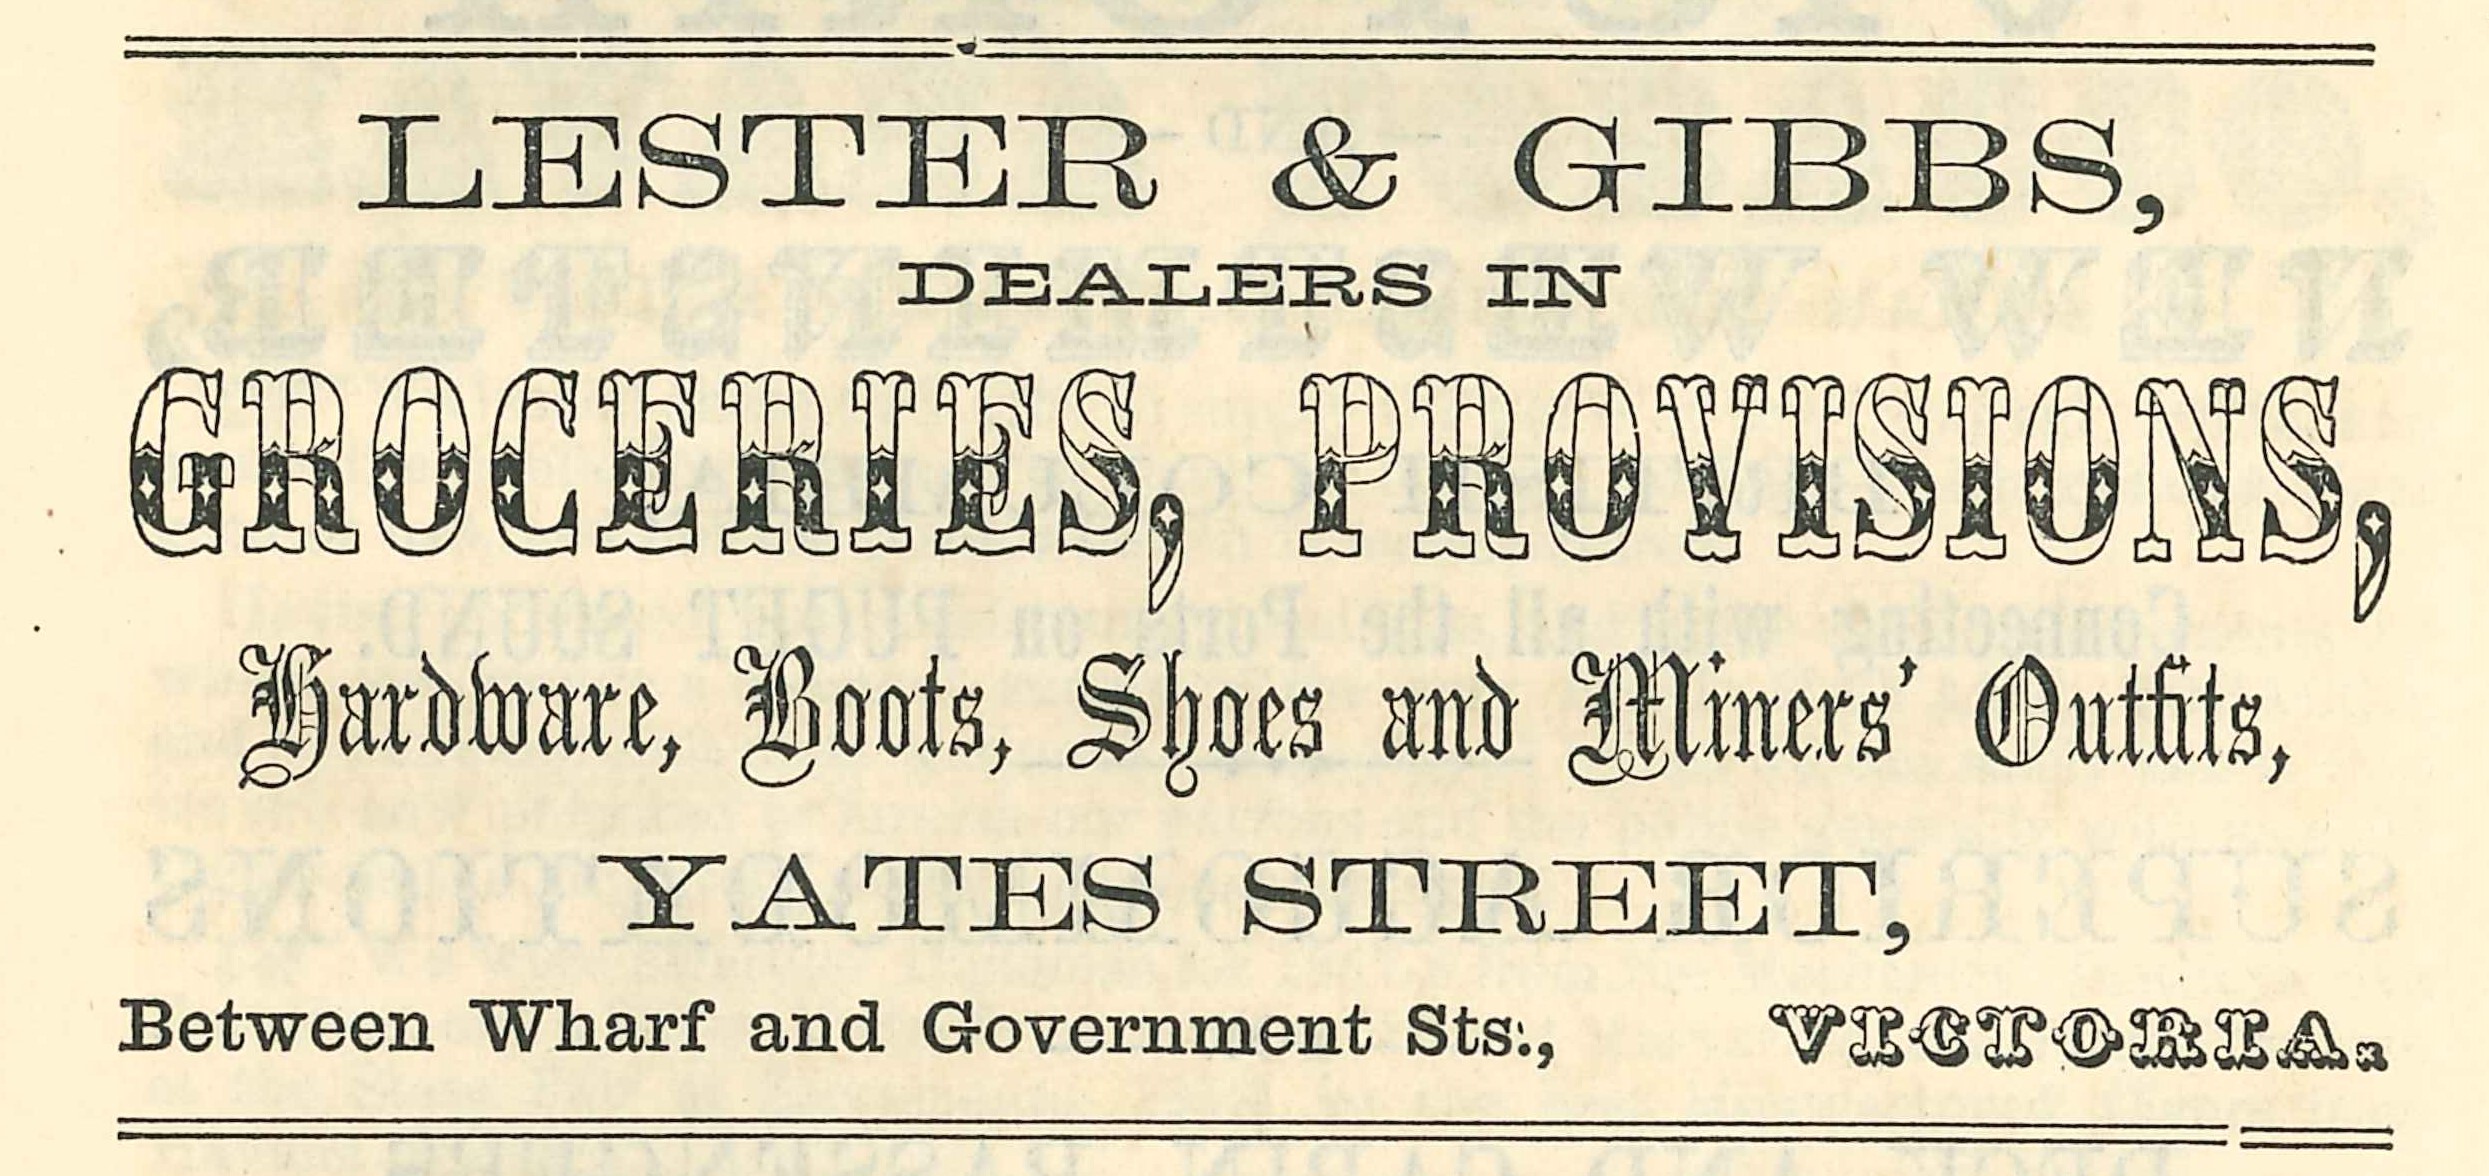 An advertisement says: Lester & Gibbs, Dealers in Groceries, Provisions, Hardware, Boots, Shoes and Miners' Outfits, Yates Street, Between Wharf and Government Sts., Victoria.